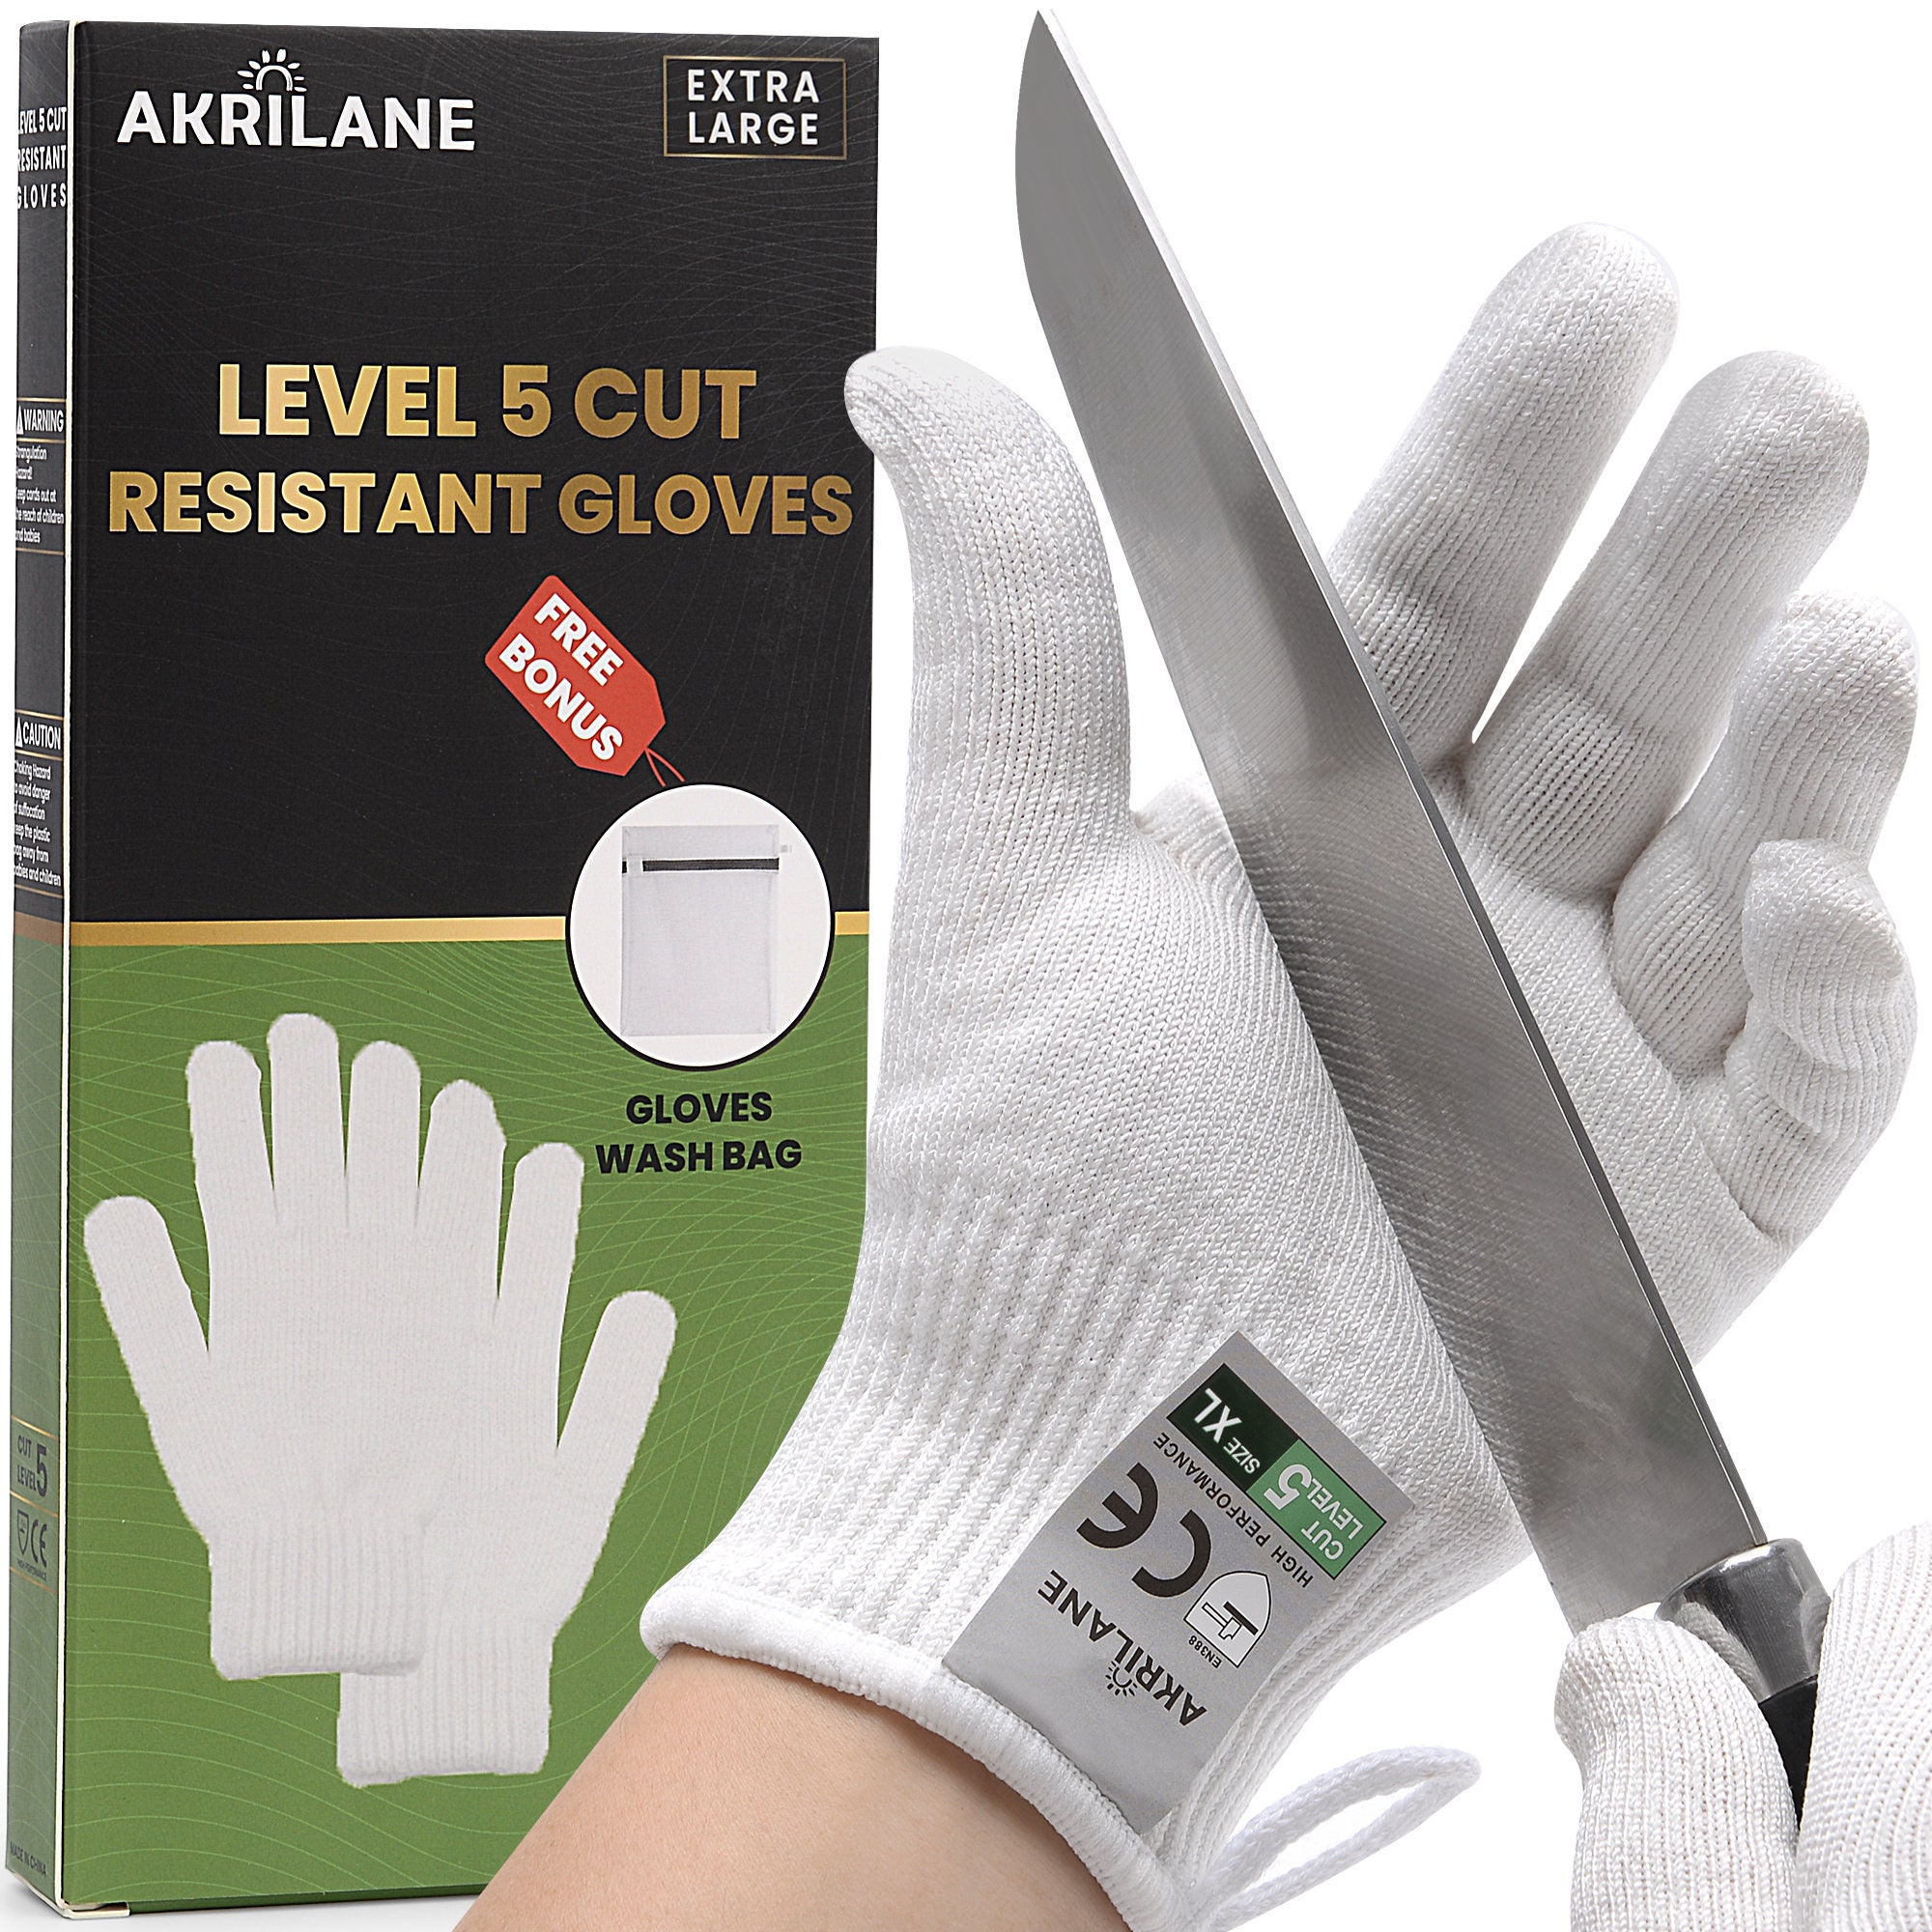 1 Pair Cut Resistant Gloves, Level 5 Protection, Safety Kitchen Cuts Gloves  For Oyster Shucking, Fish Fillet Processing, Mandolin Slicing, Meat  Cutting, Wood Carving And Gardening